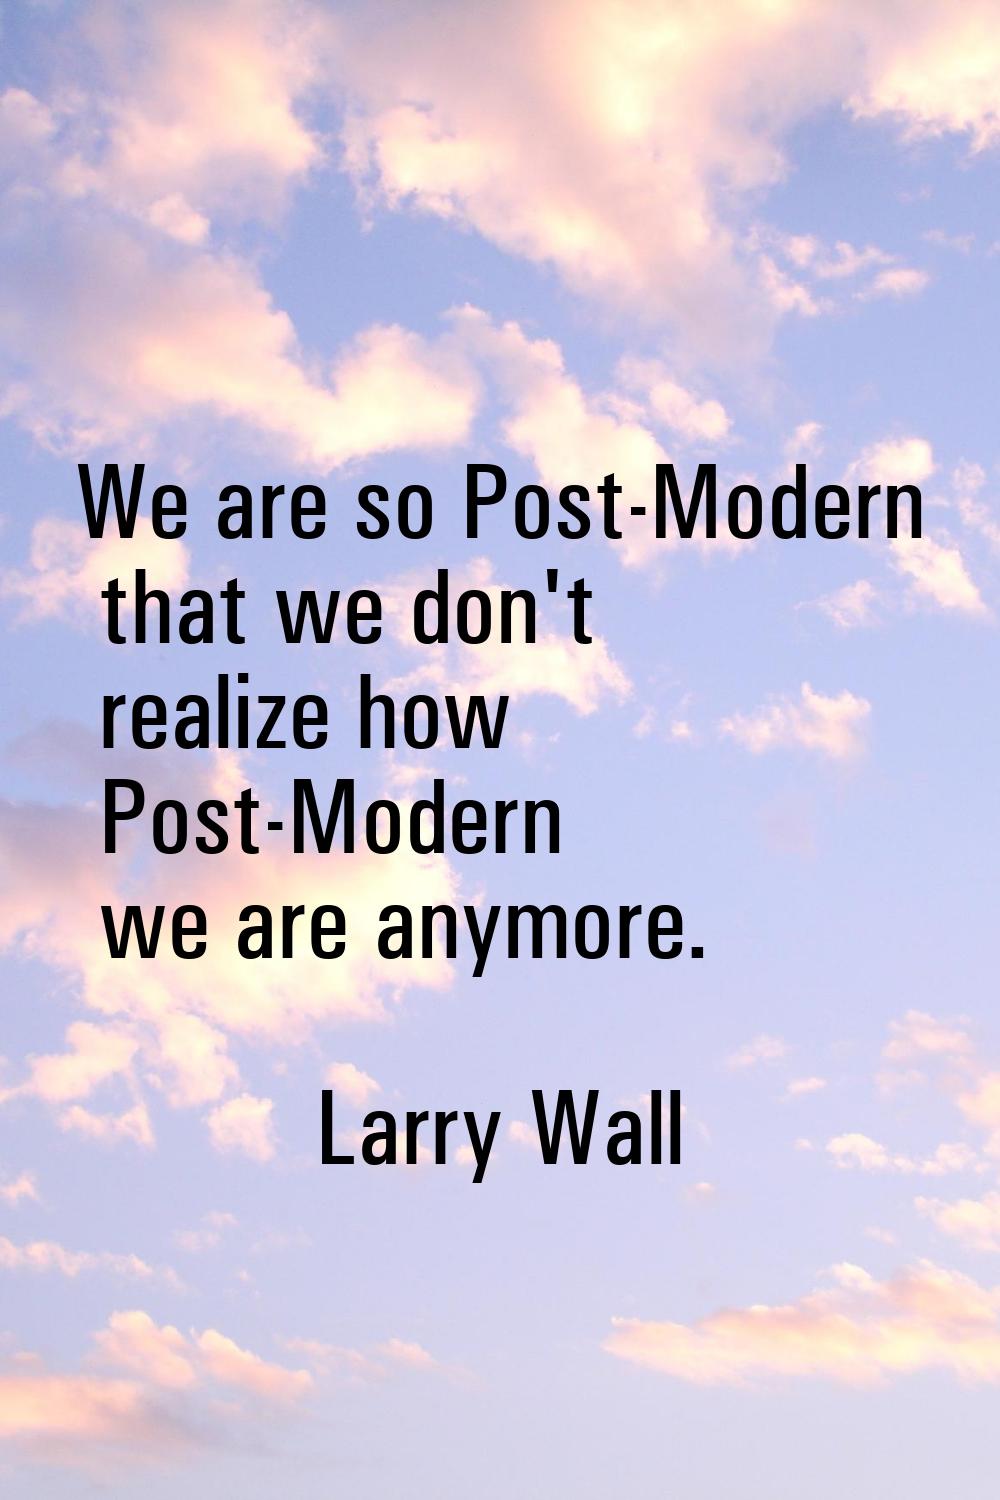 We are so Post-Modern that we don't realize how Post-Modern we are anymore.